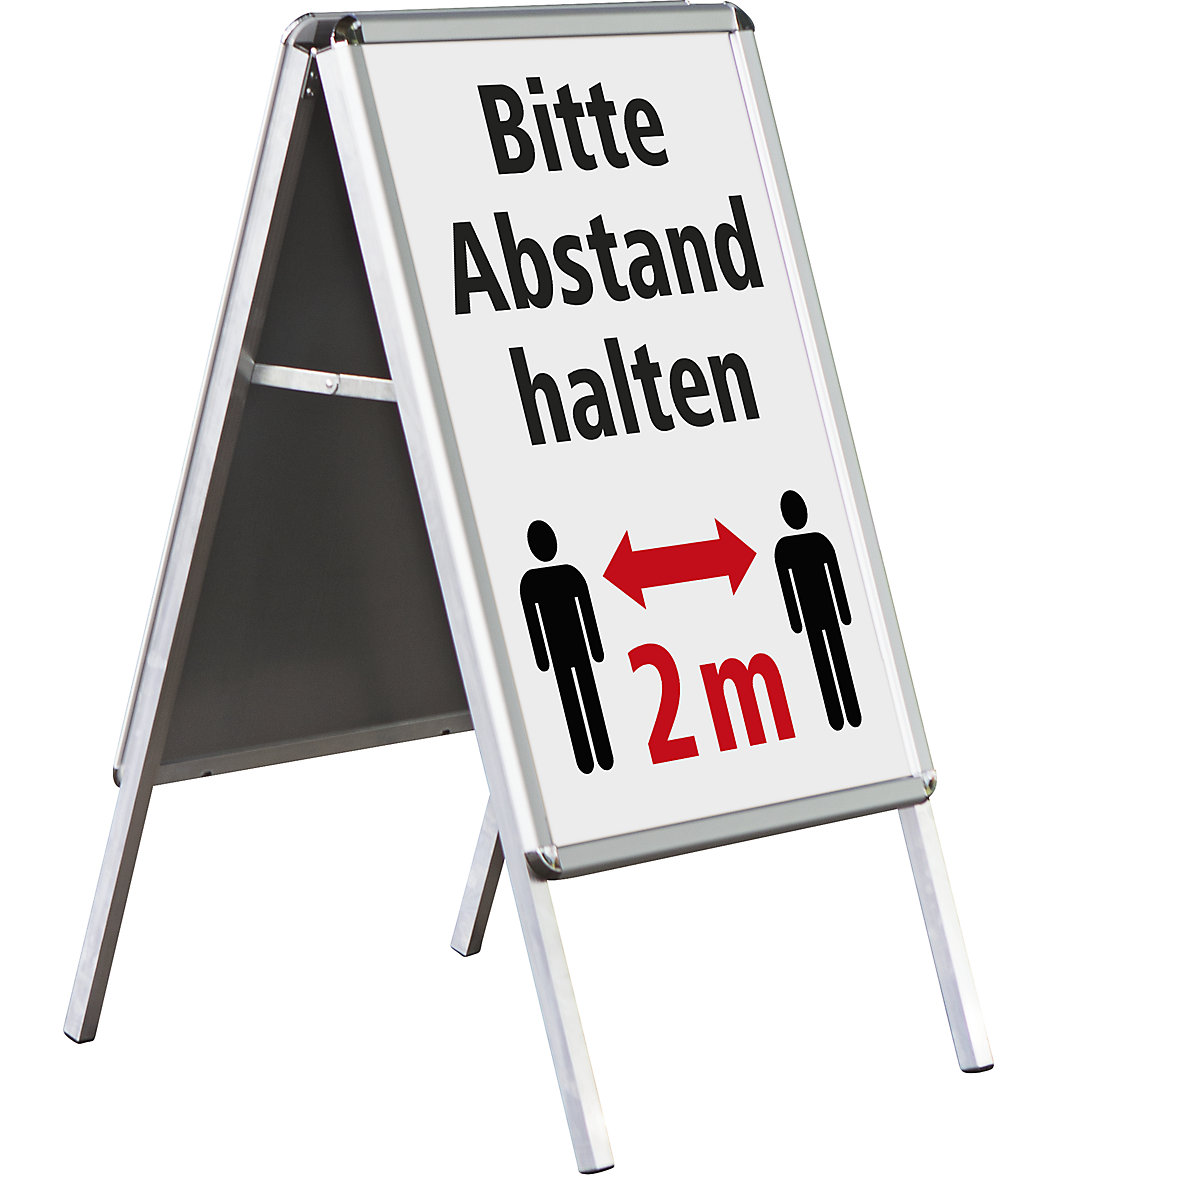 OUTDOOR folding advertising stand